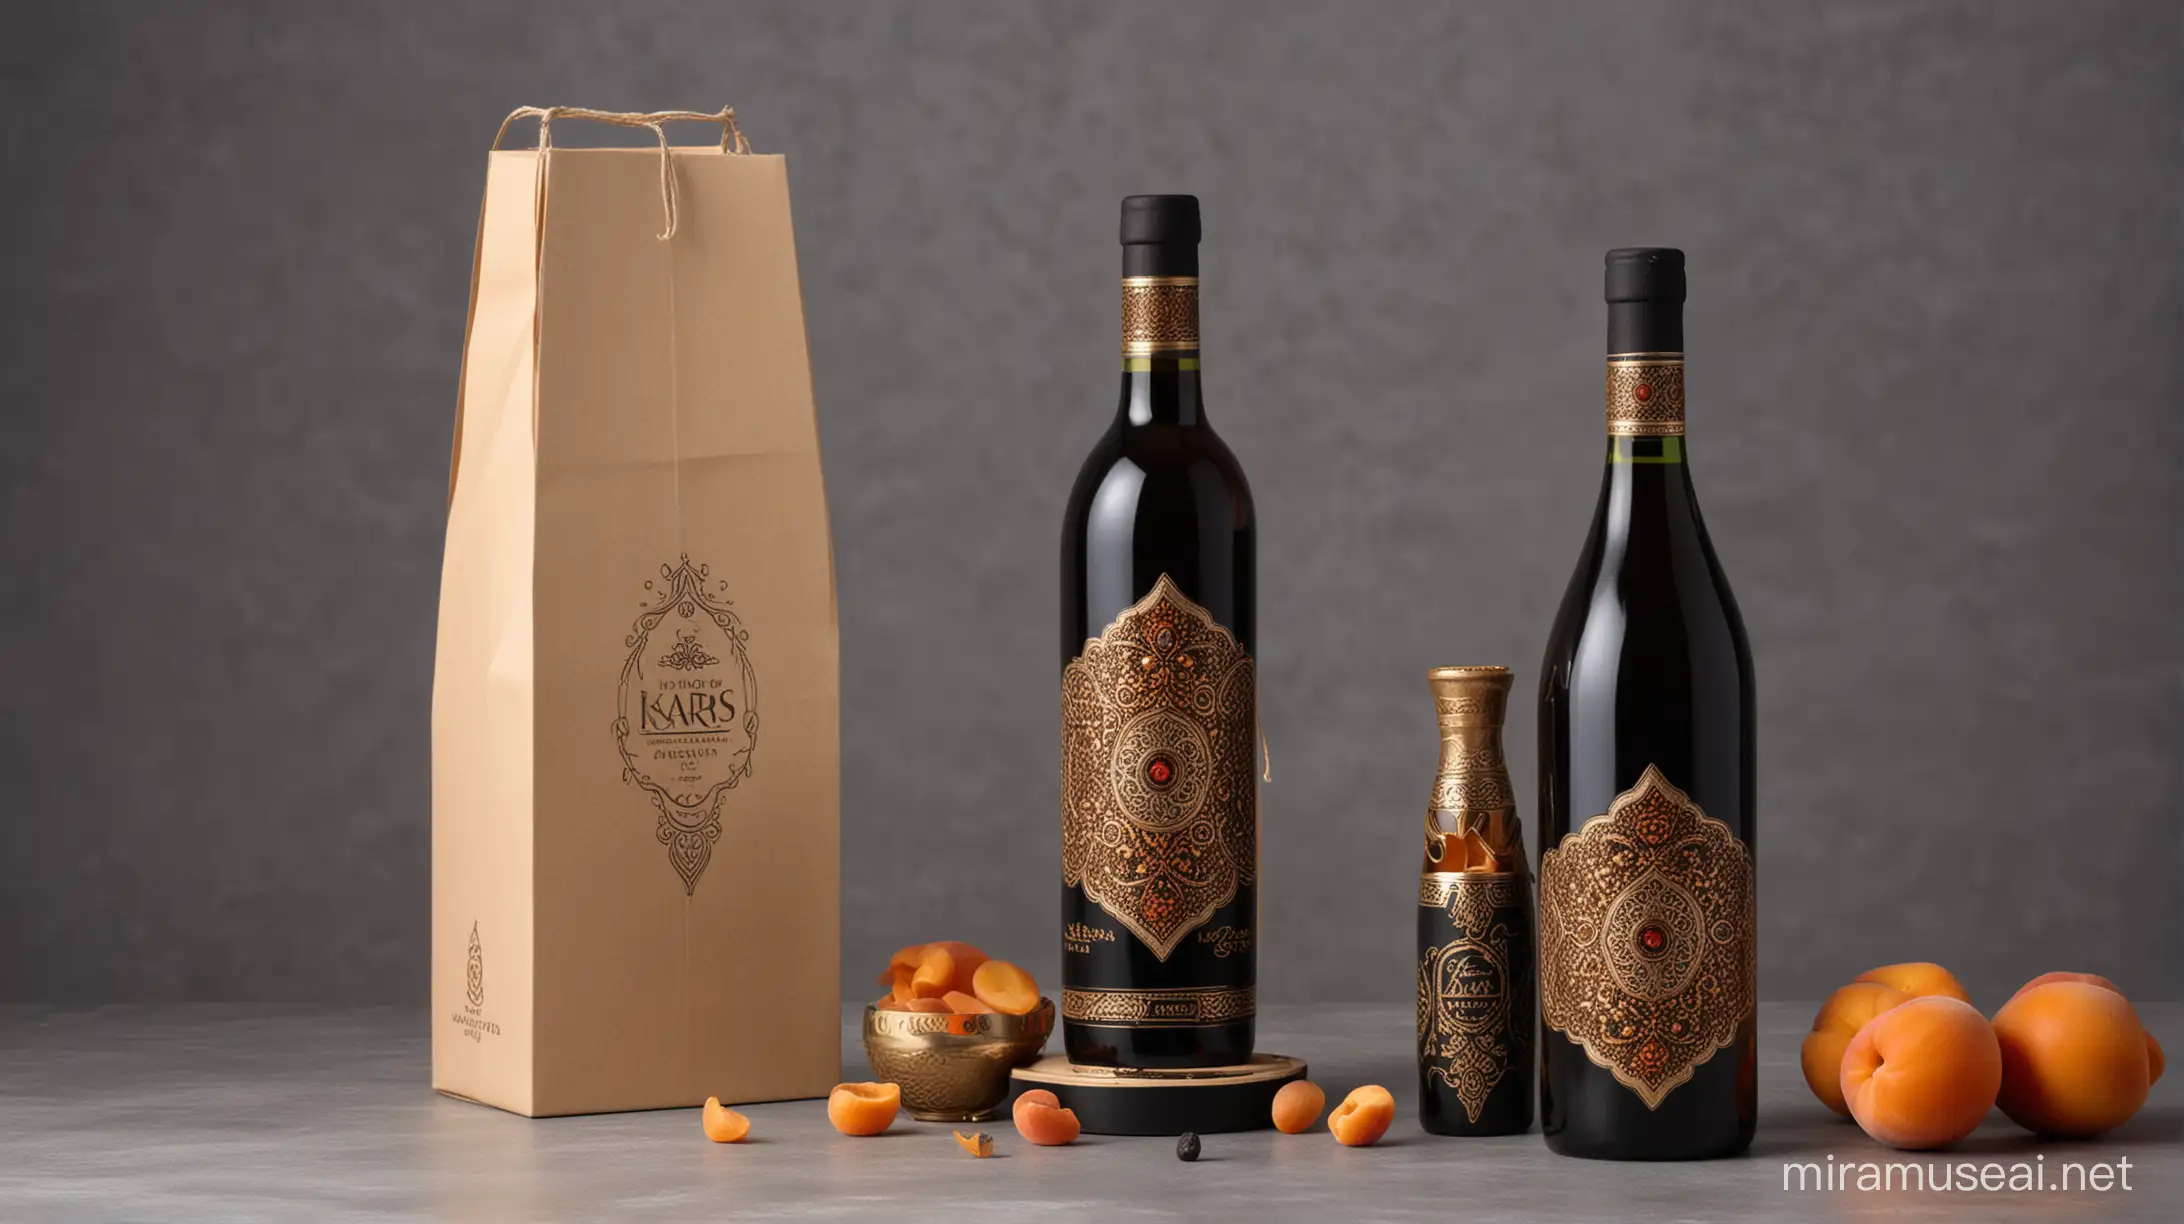 5th century Royal Armenian Apricot Wine called "KARS" modern wine bottle and box with luxurious packaging, modern and exclusive style Armenian stones and ornamentation